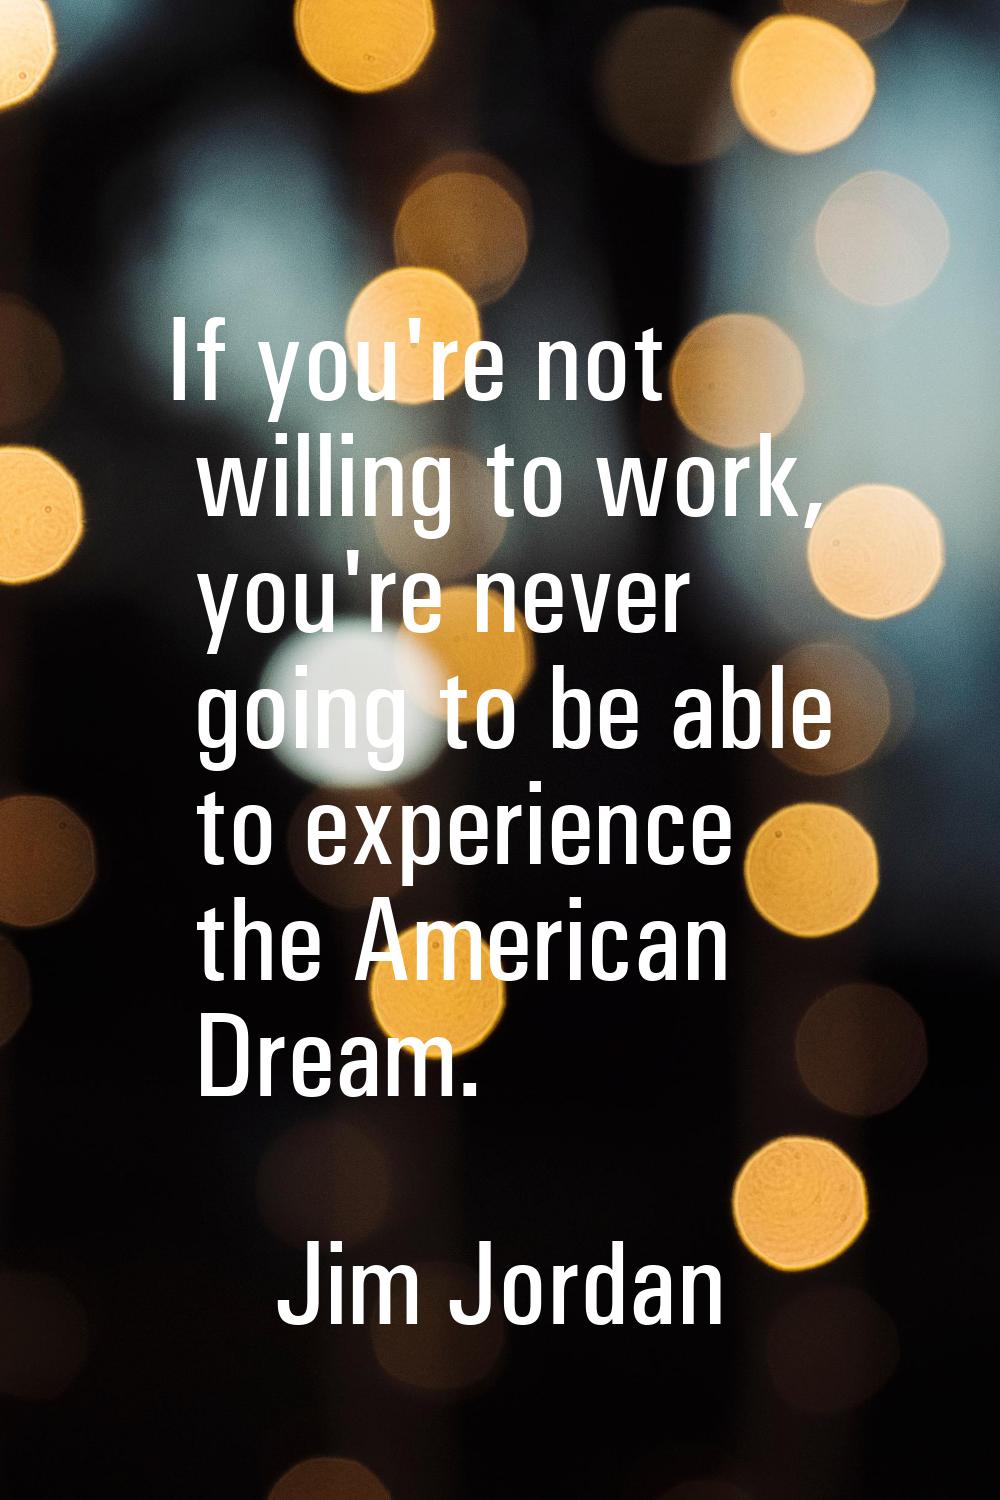 If you're not willing to work, you're never going to be able to experience the American Dream.